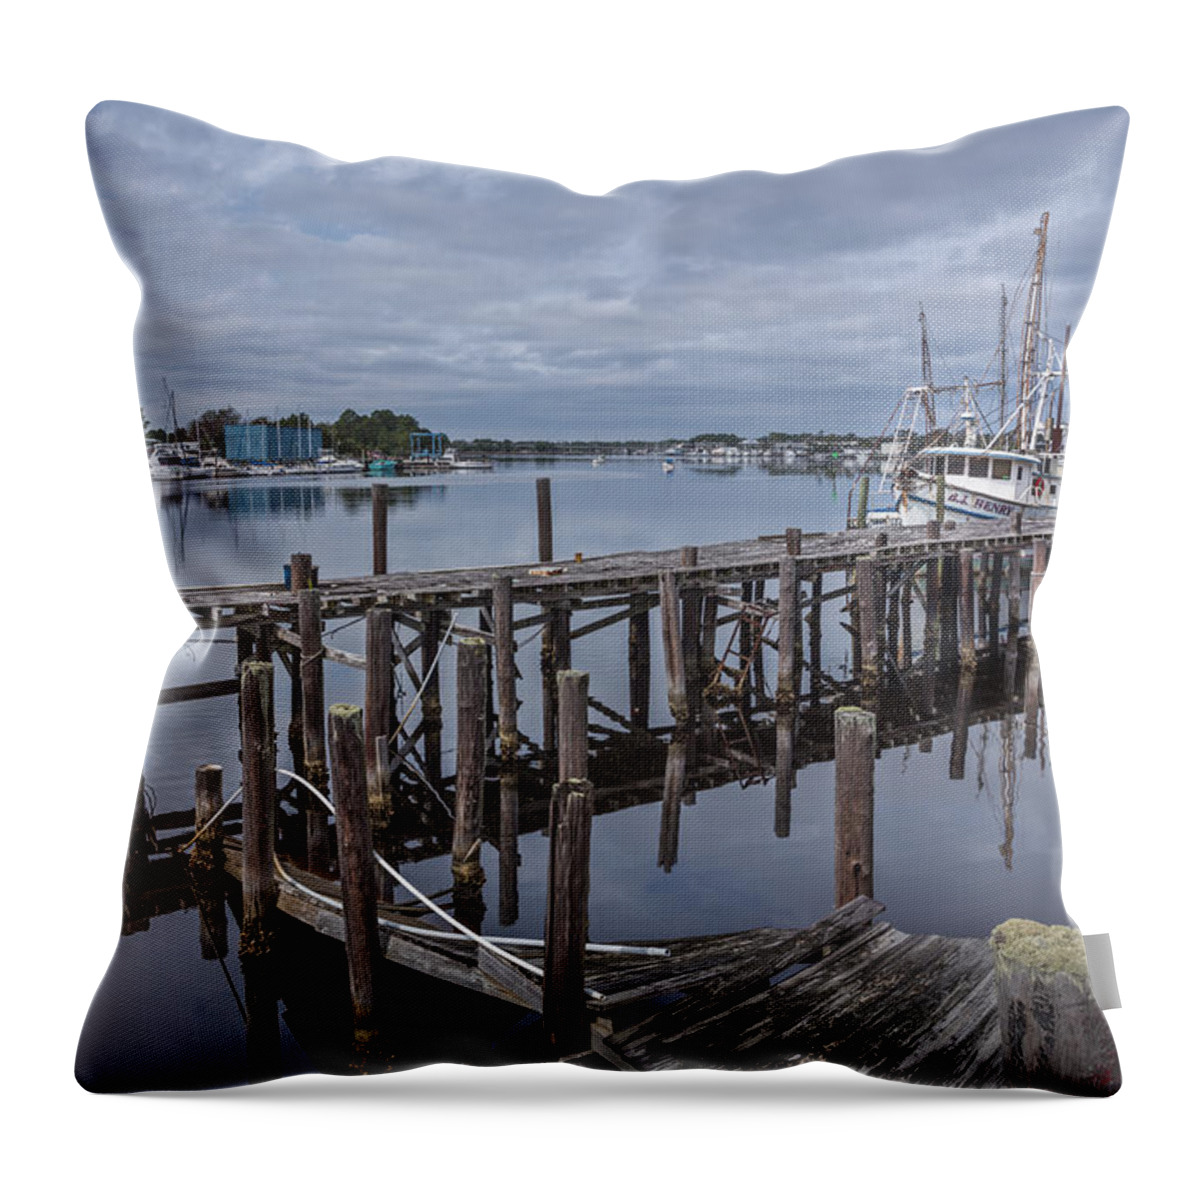 Ship Throw Pillow featuring the photograph Harbor Work by Jon Glaser